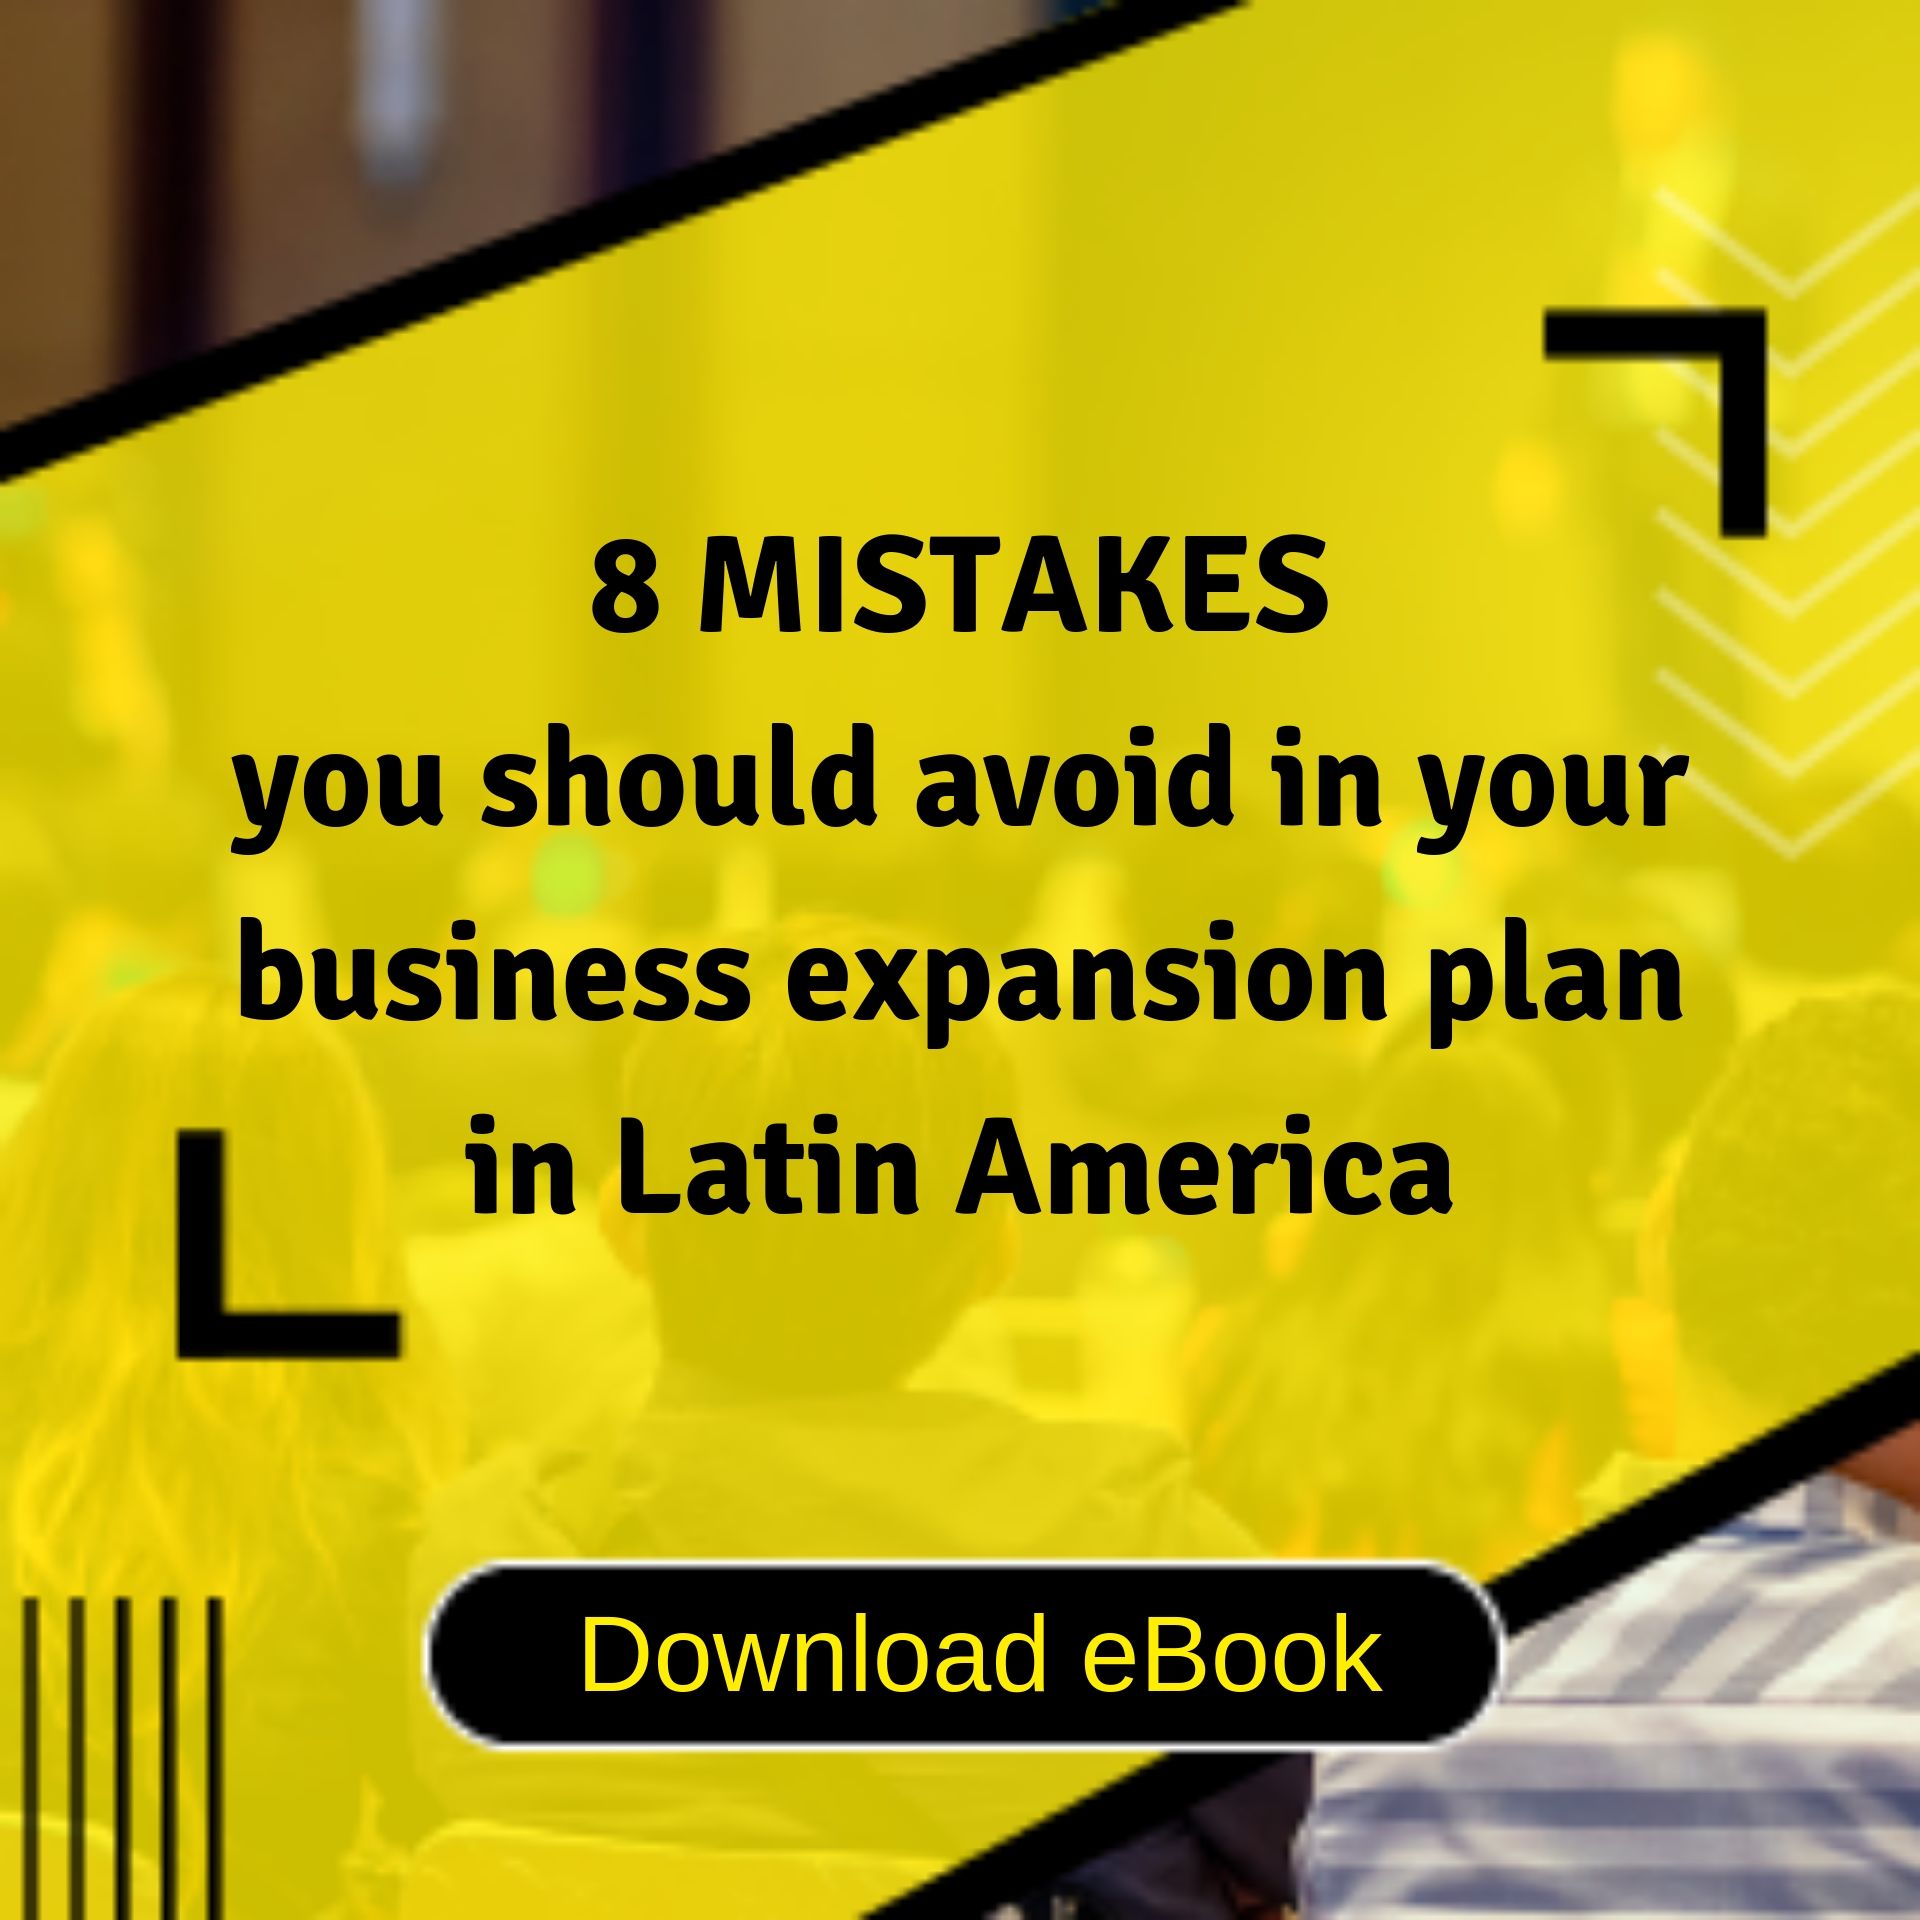 8 Mistakes you should avoid in your business expansion plan in Latin America